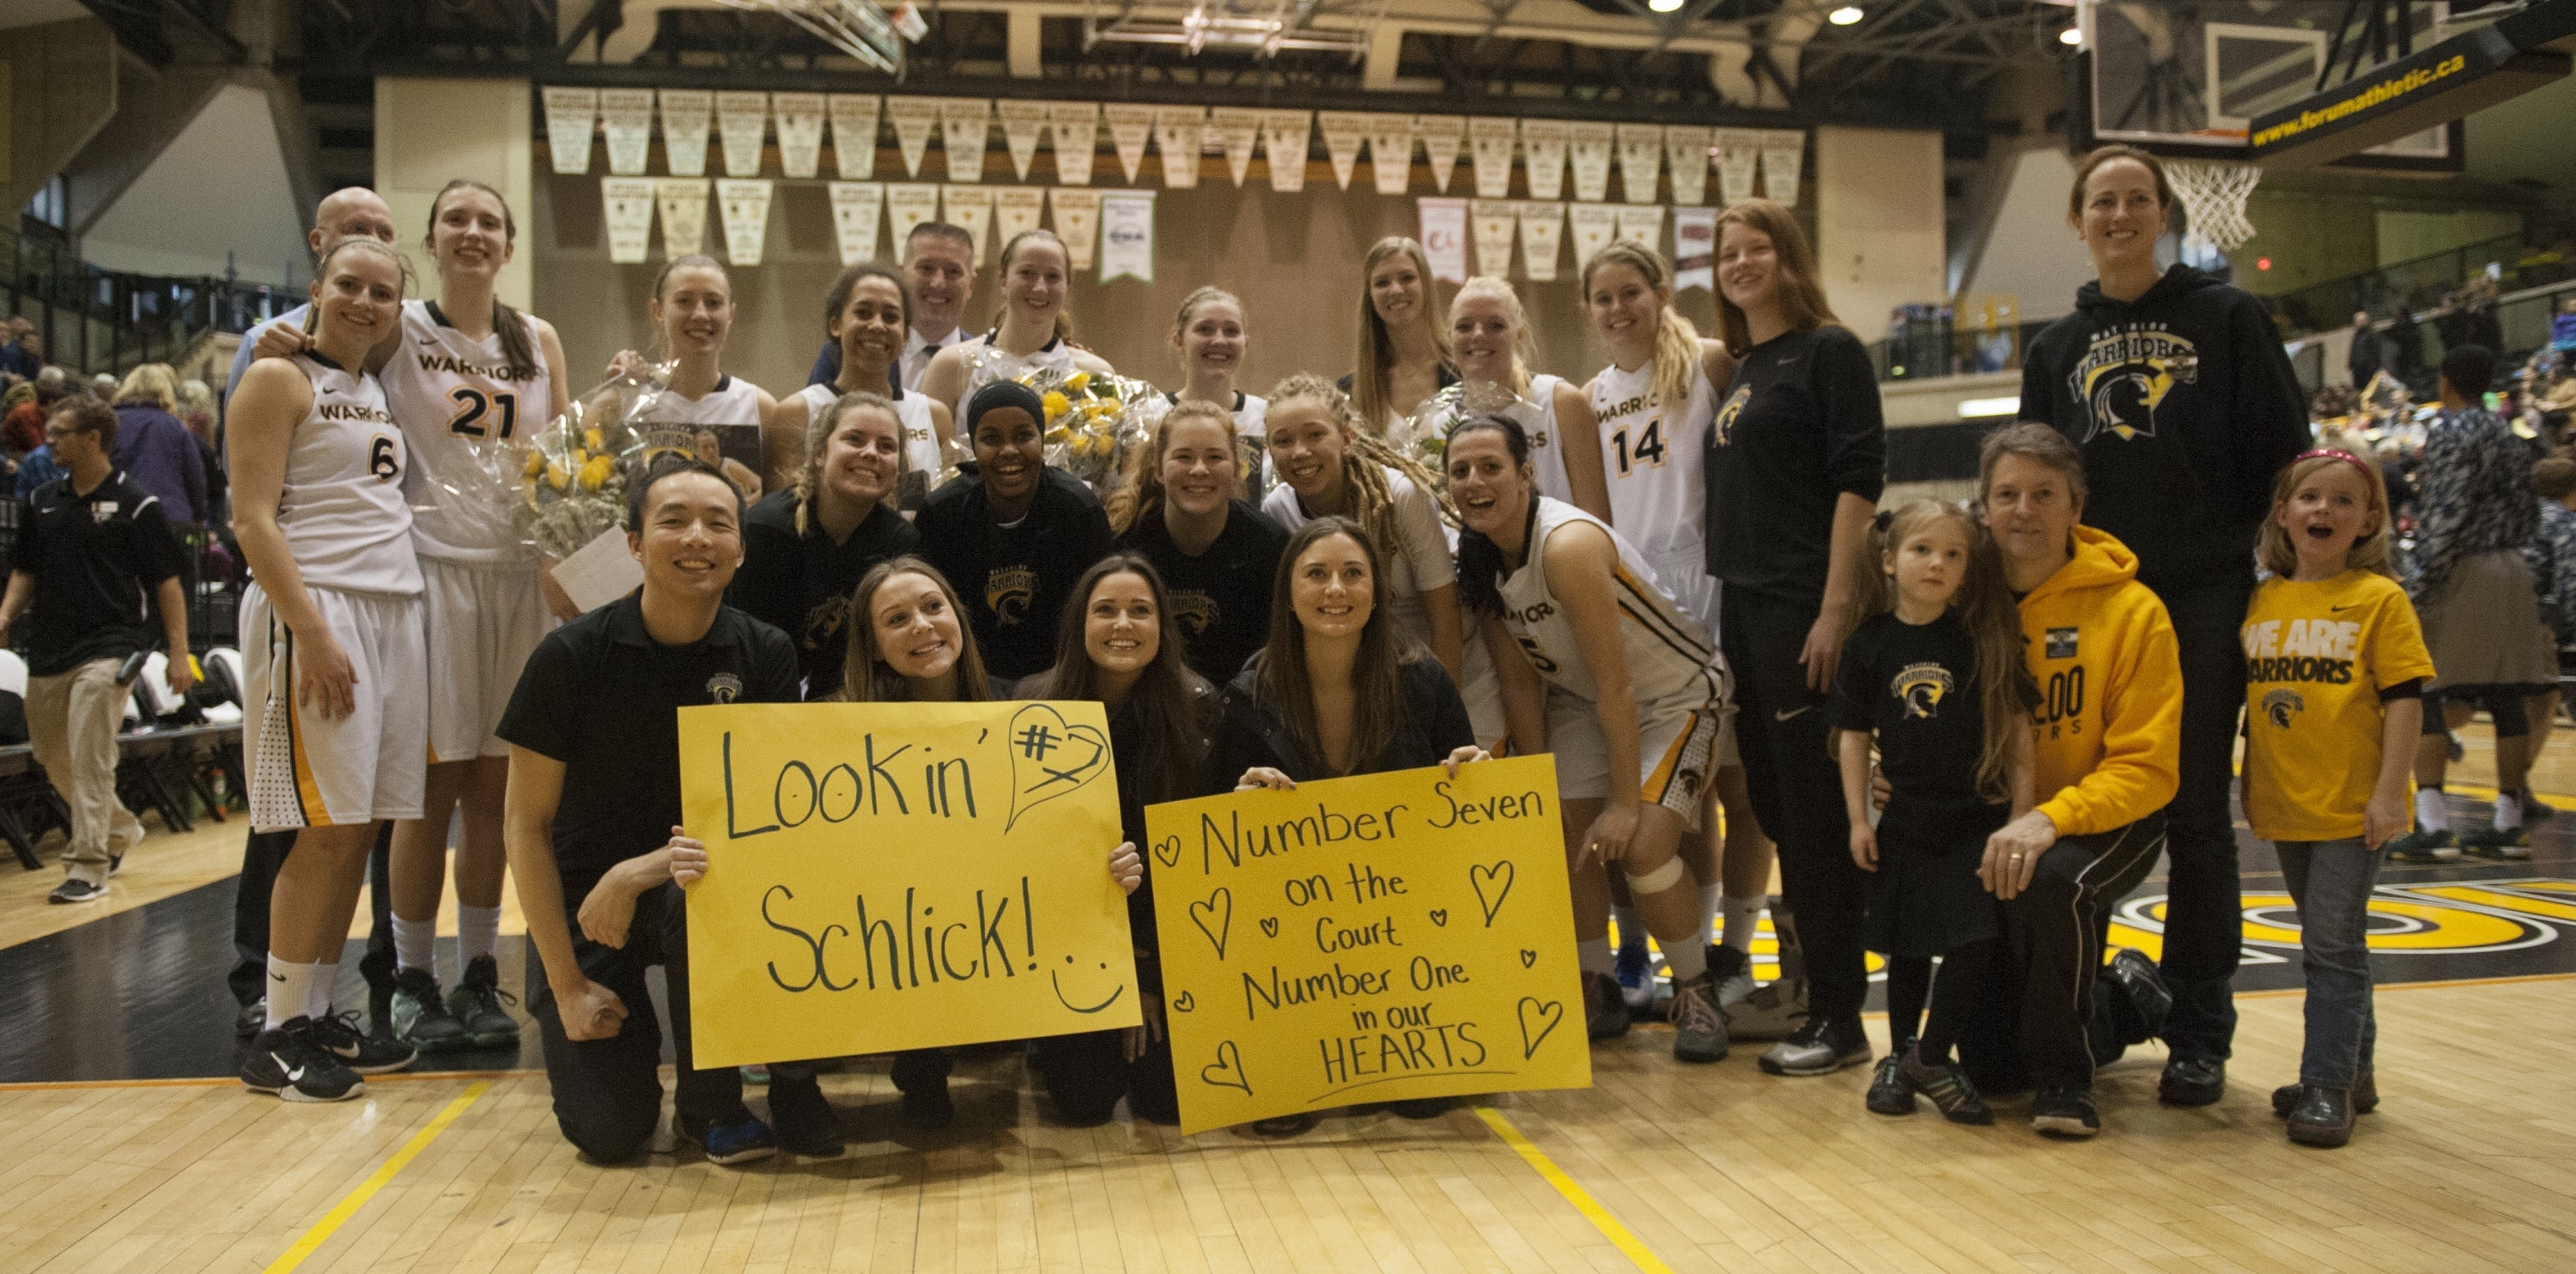 Women's basketball team and supporters